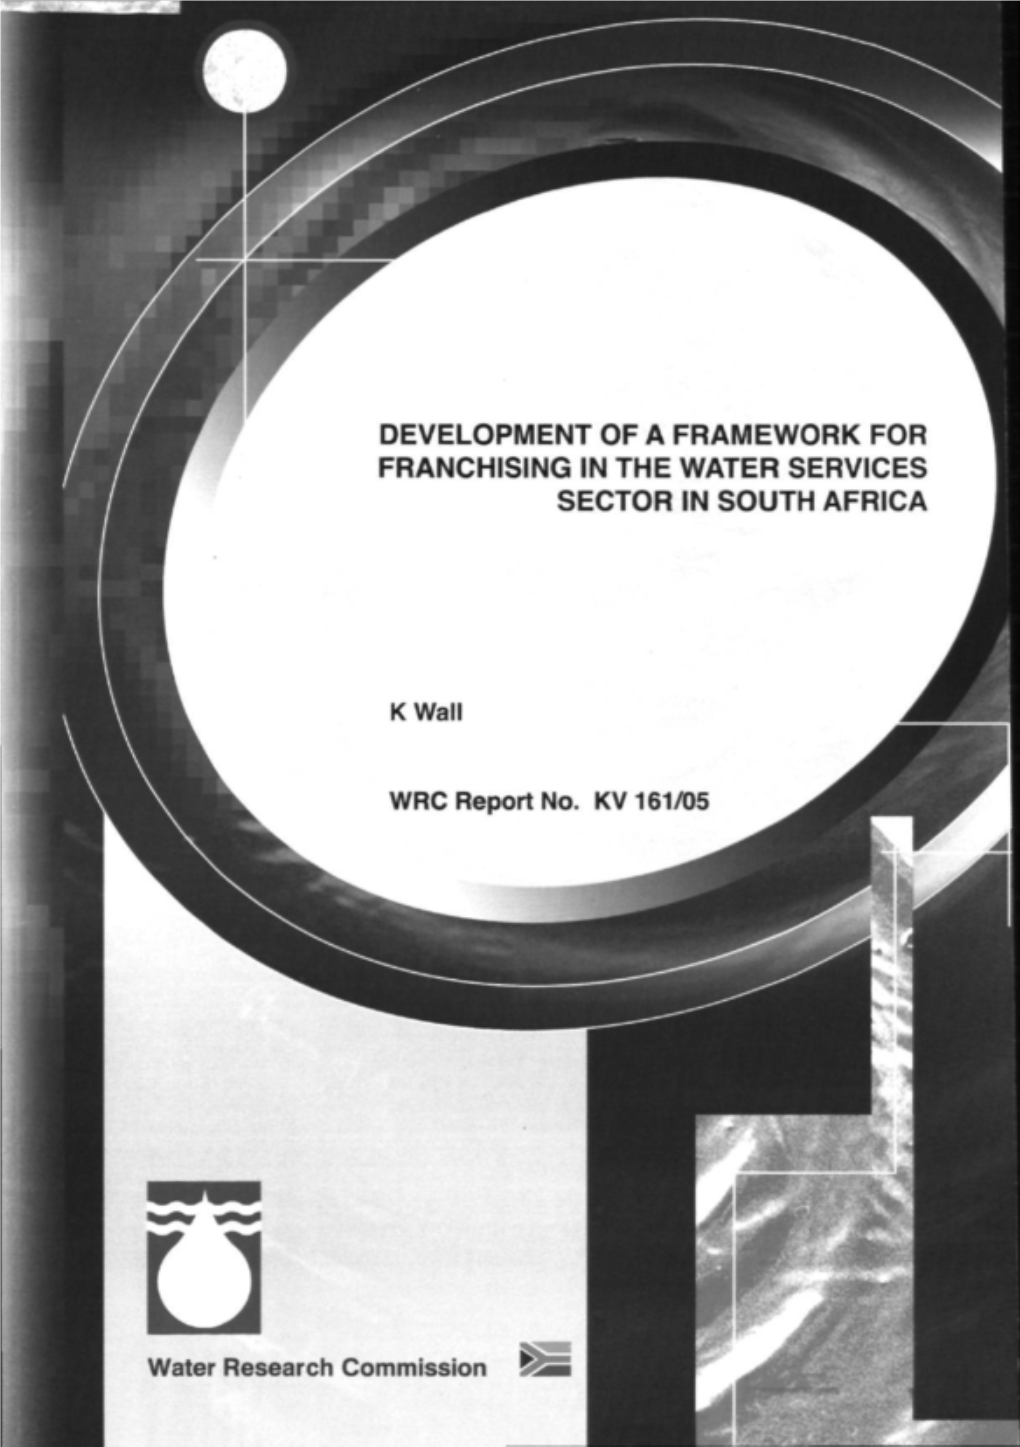 Development of a Framework for Franchising in the Water Services Sector in South Africa